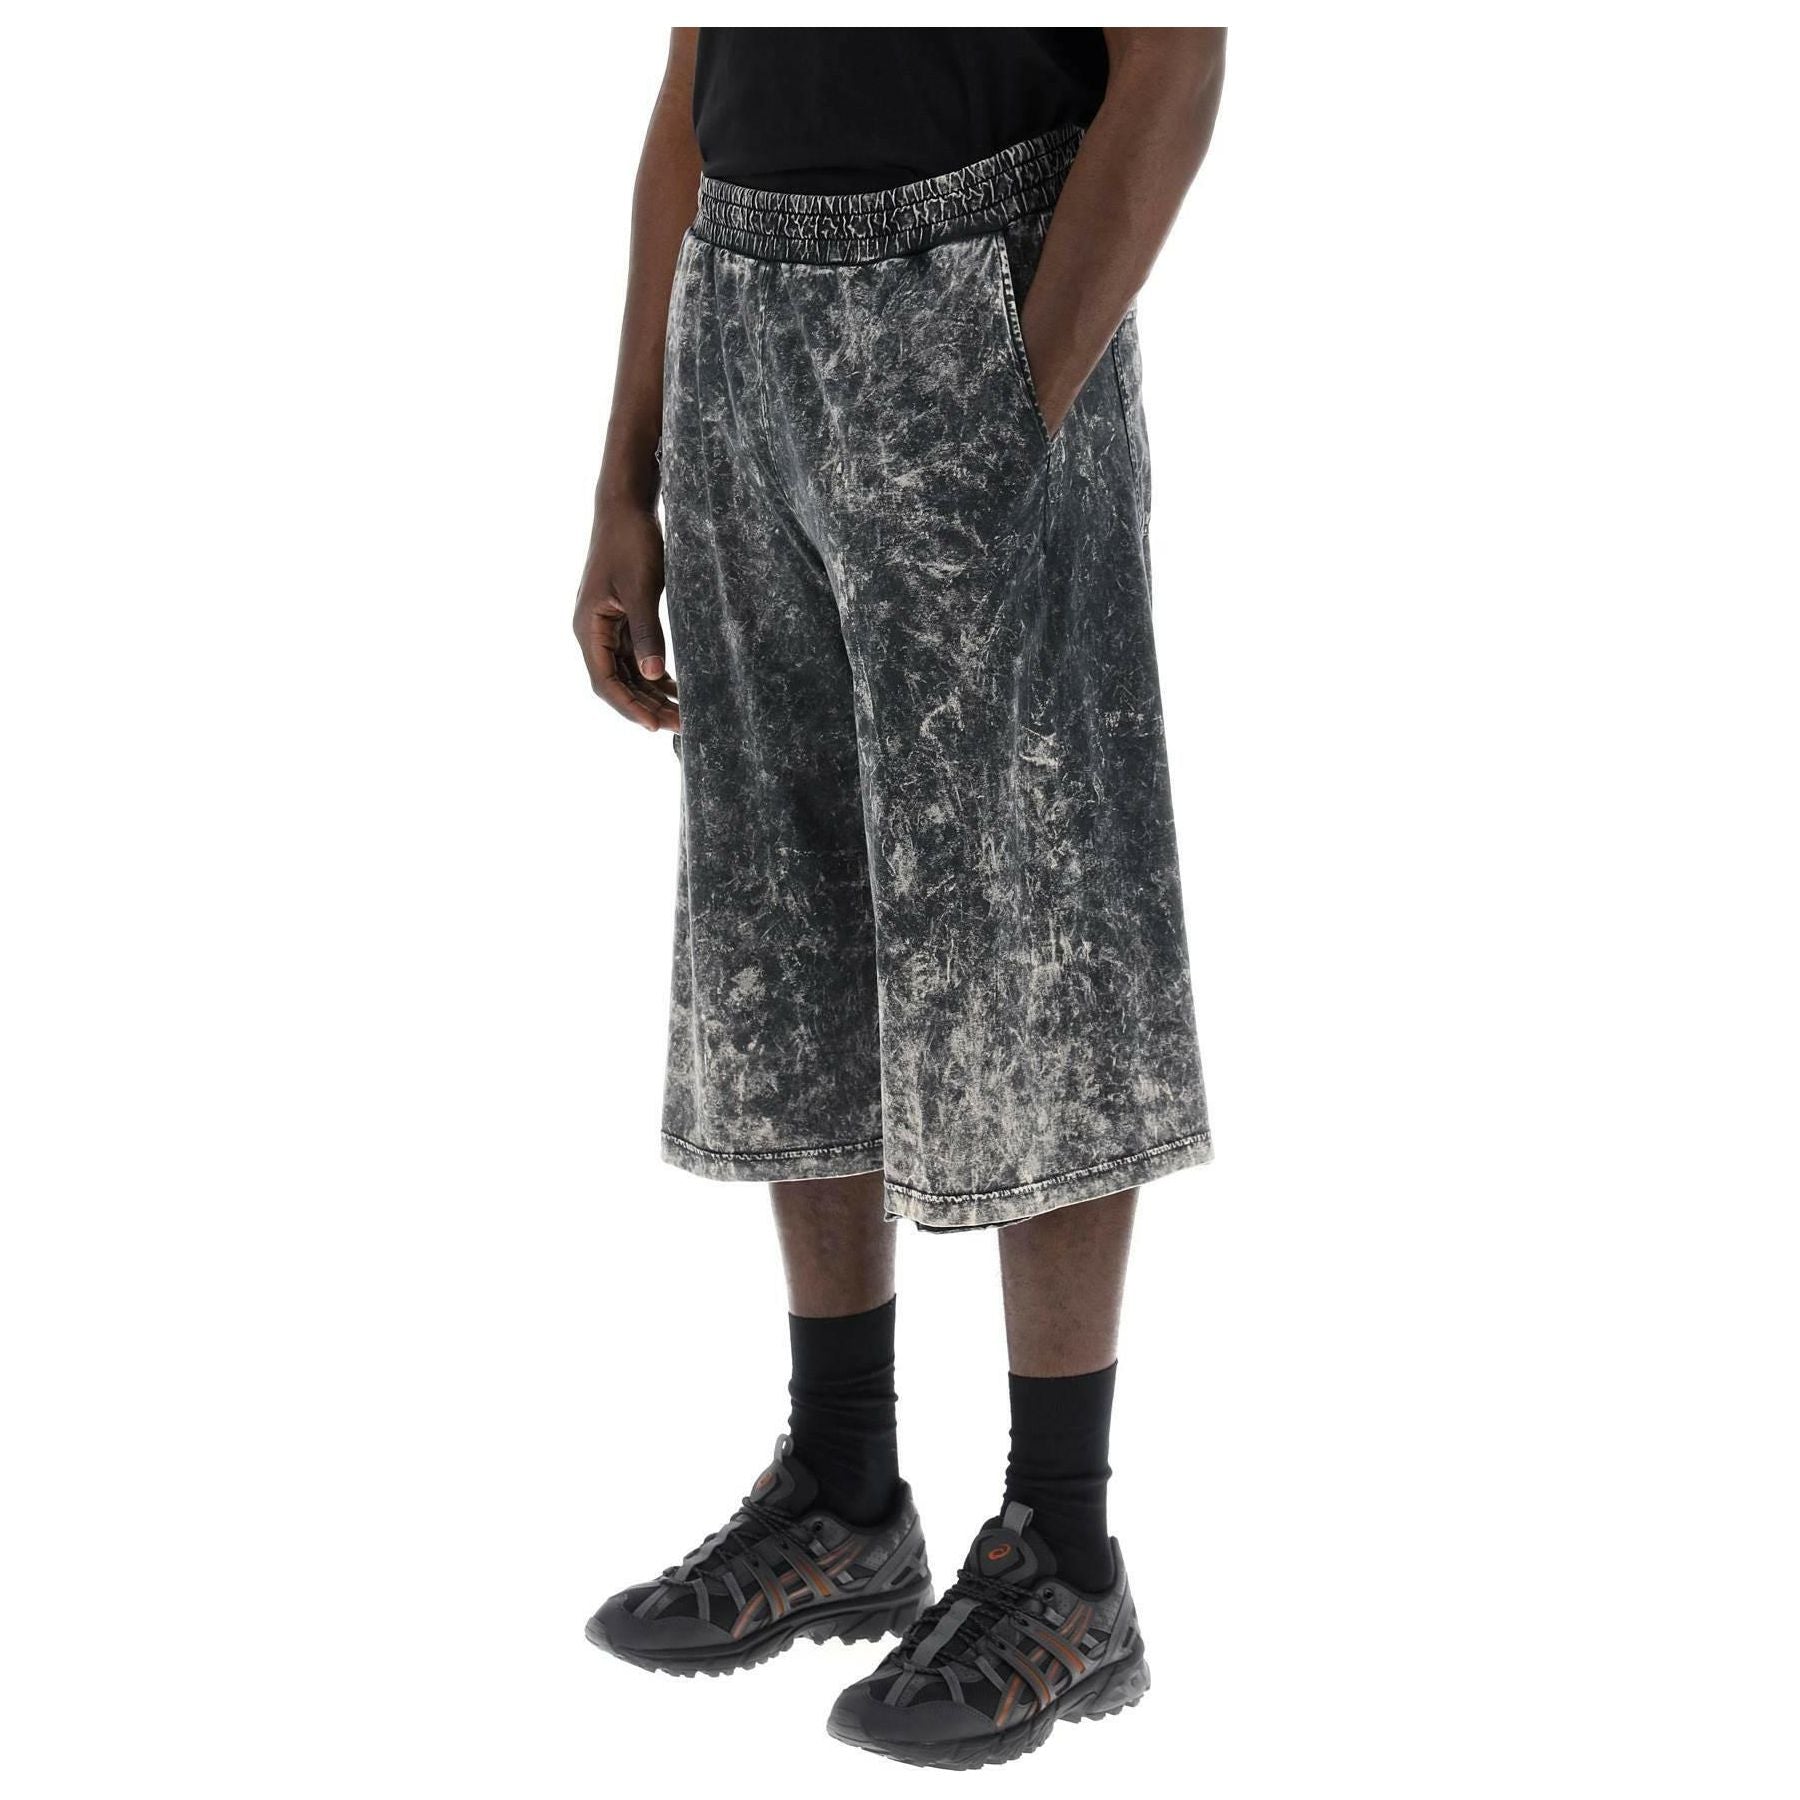 Double-Layered Marbled Destroyed Cotton Shorts DIESEL JOHN JULIA.